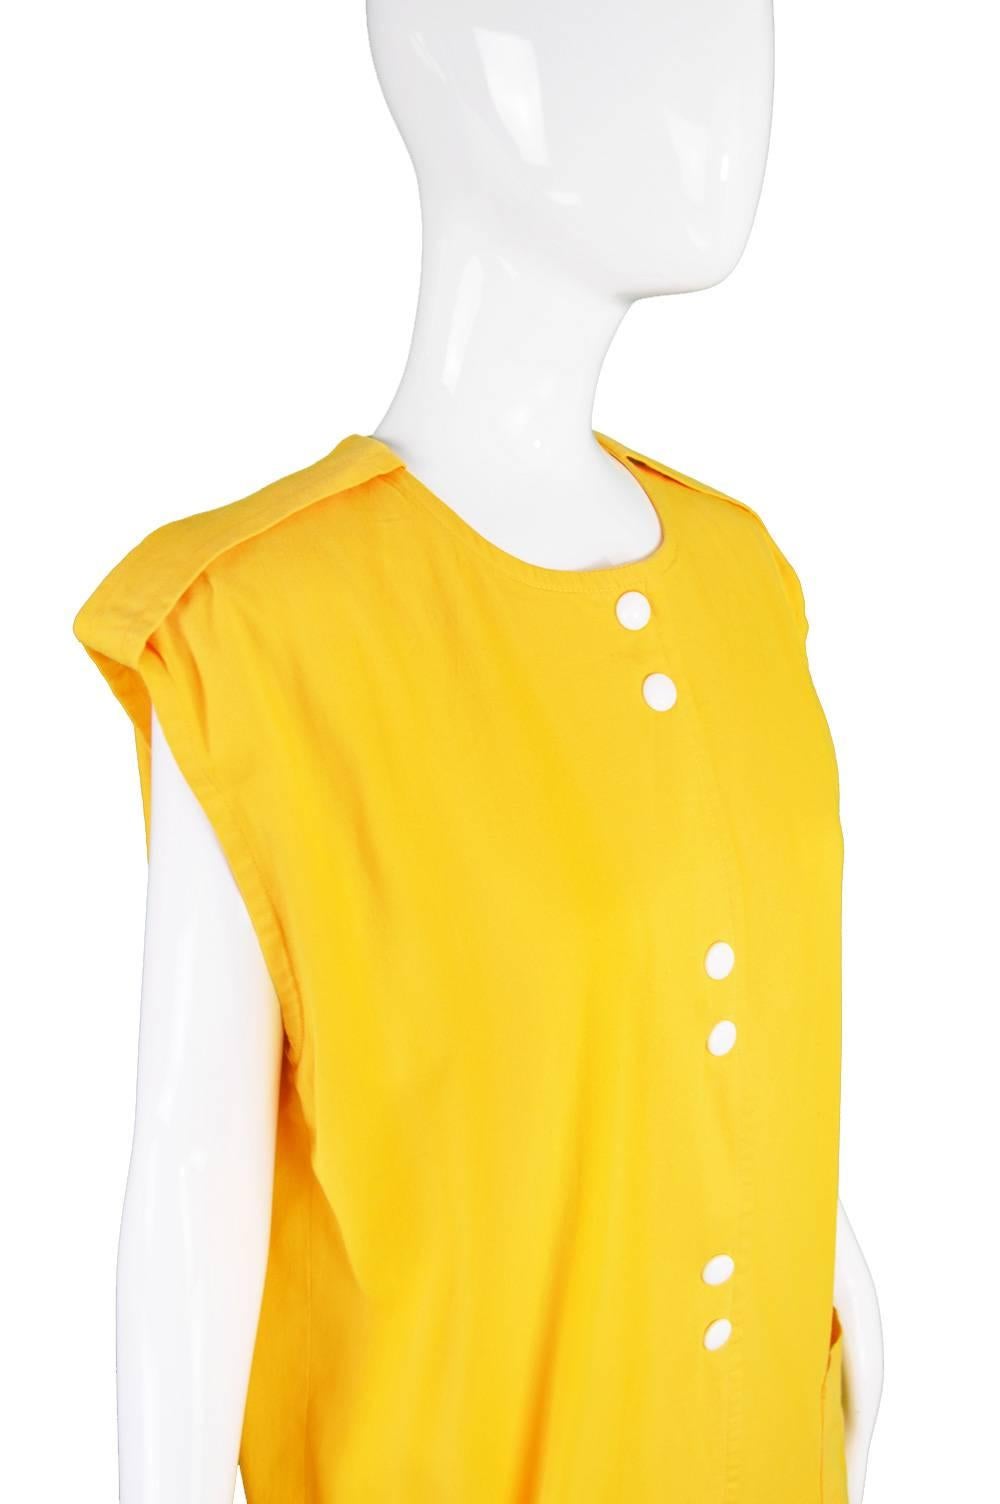 Women's Pierre Cardin Mustard Yellow Dress with Oversized Patch Pockets, 1980s For Sale